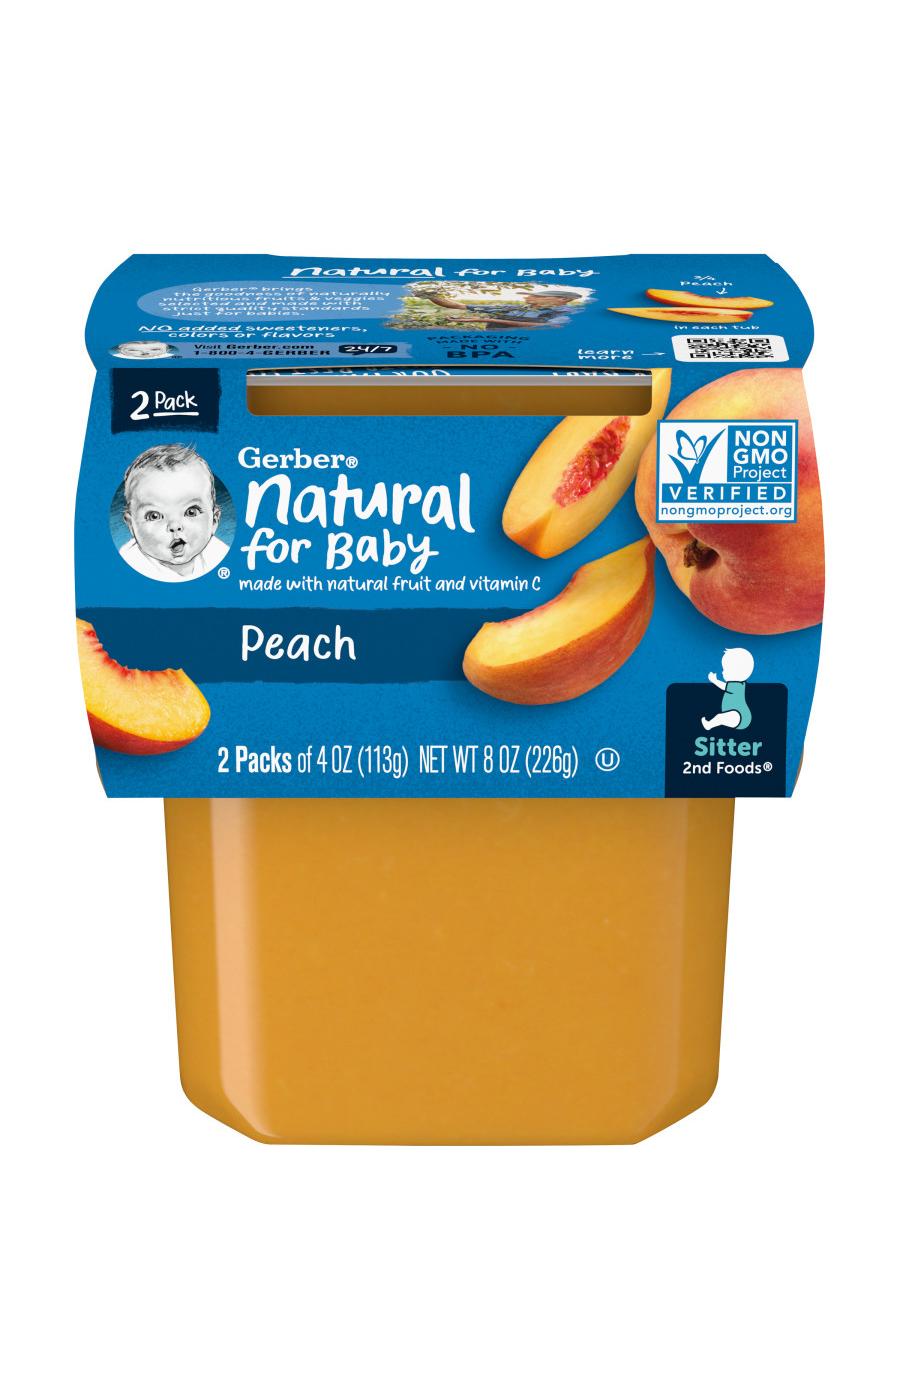 Gerber Natural for Baby 2nd Foods - Peach; image 1 of 8